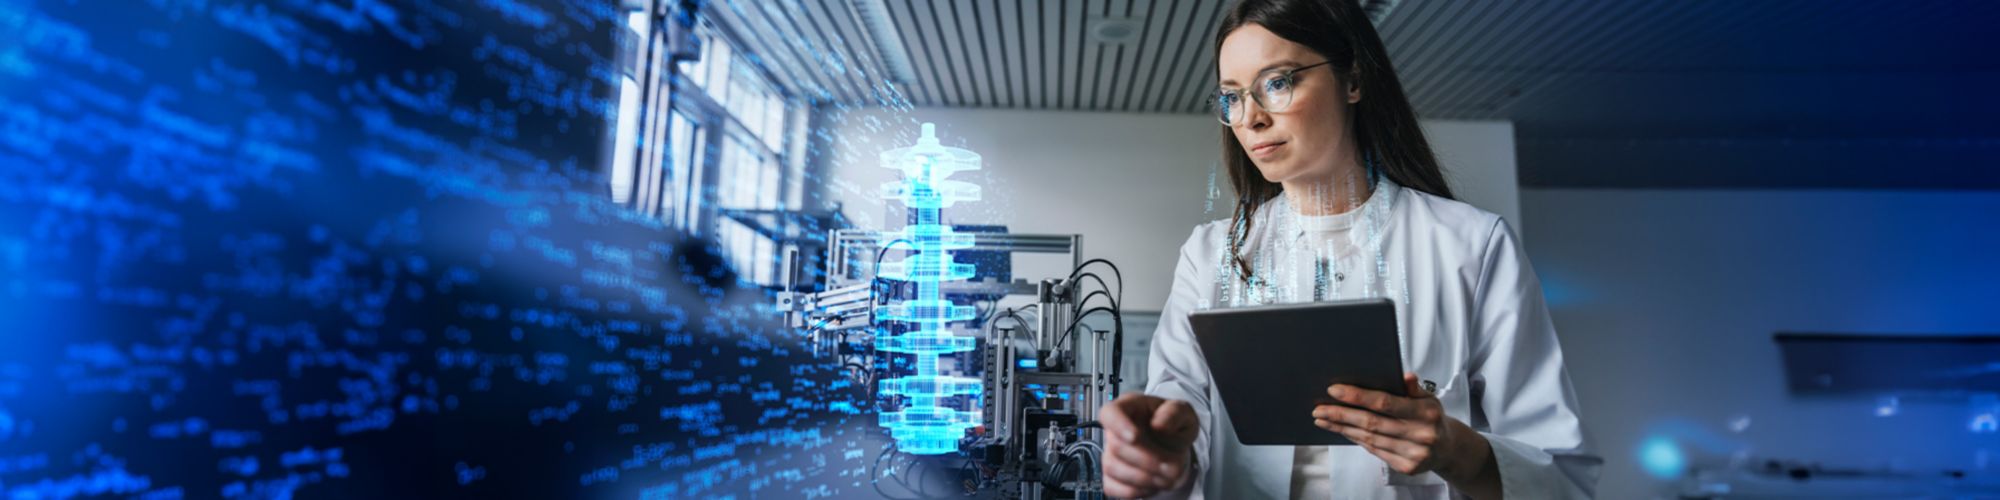 Female engineer holding tablet in futuristic lab